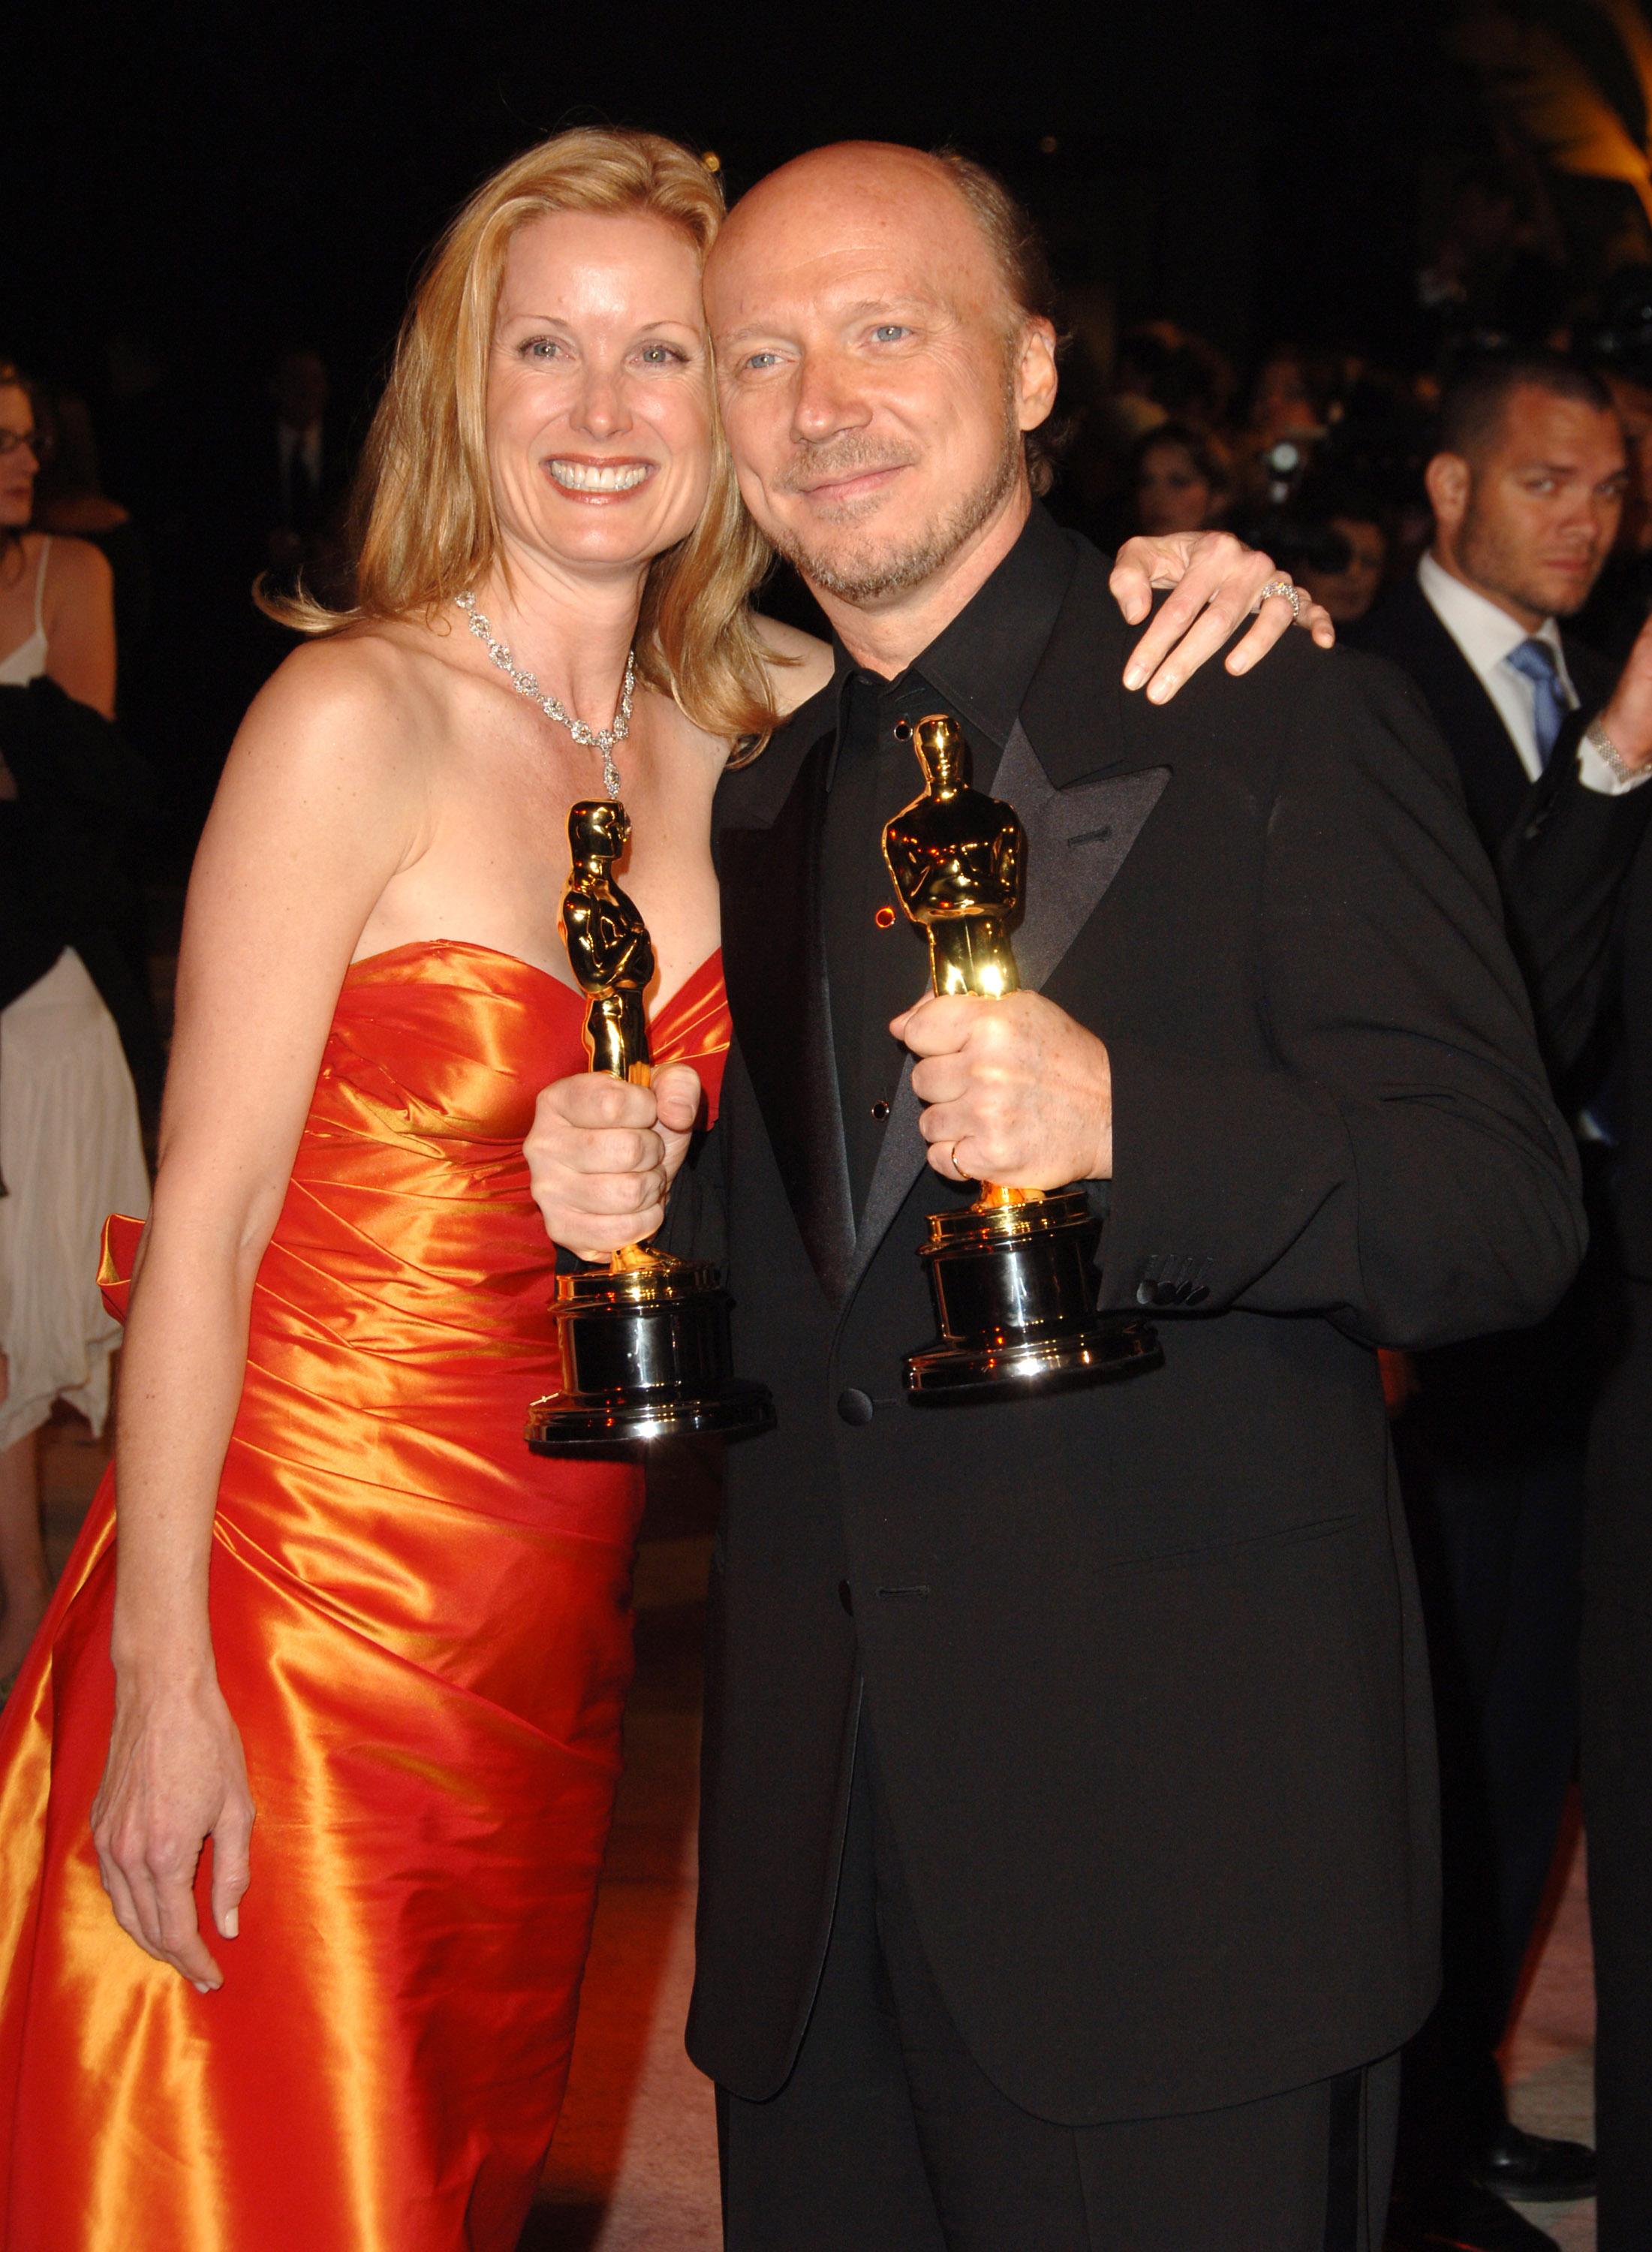 Paul Haggis holding his winnings for Best Picture and Best Original Screenplay for "Crash" and Deborah Rennard at the Vanity Fair Oscar Party on March 5, 2006 | Source: Getty Images